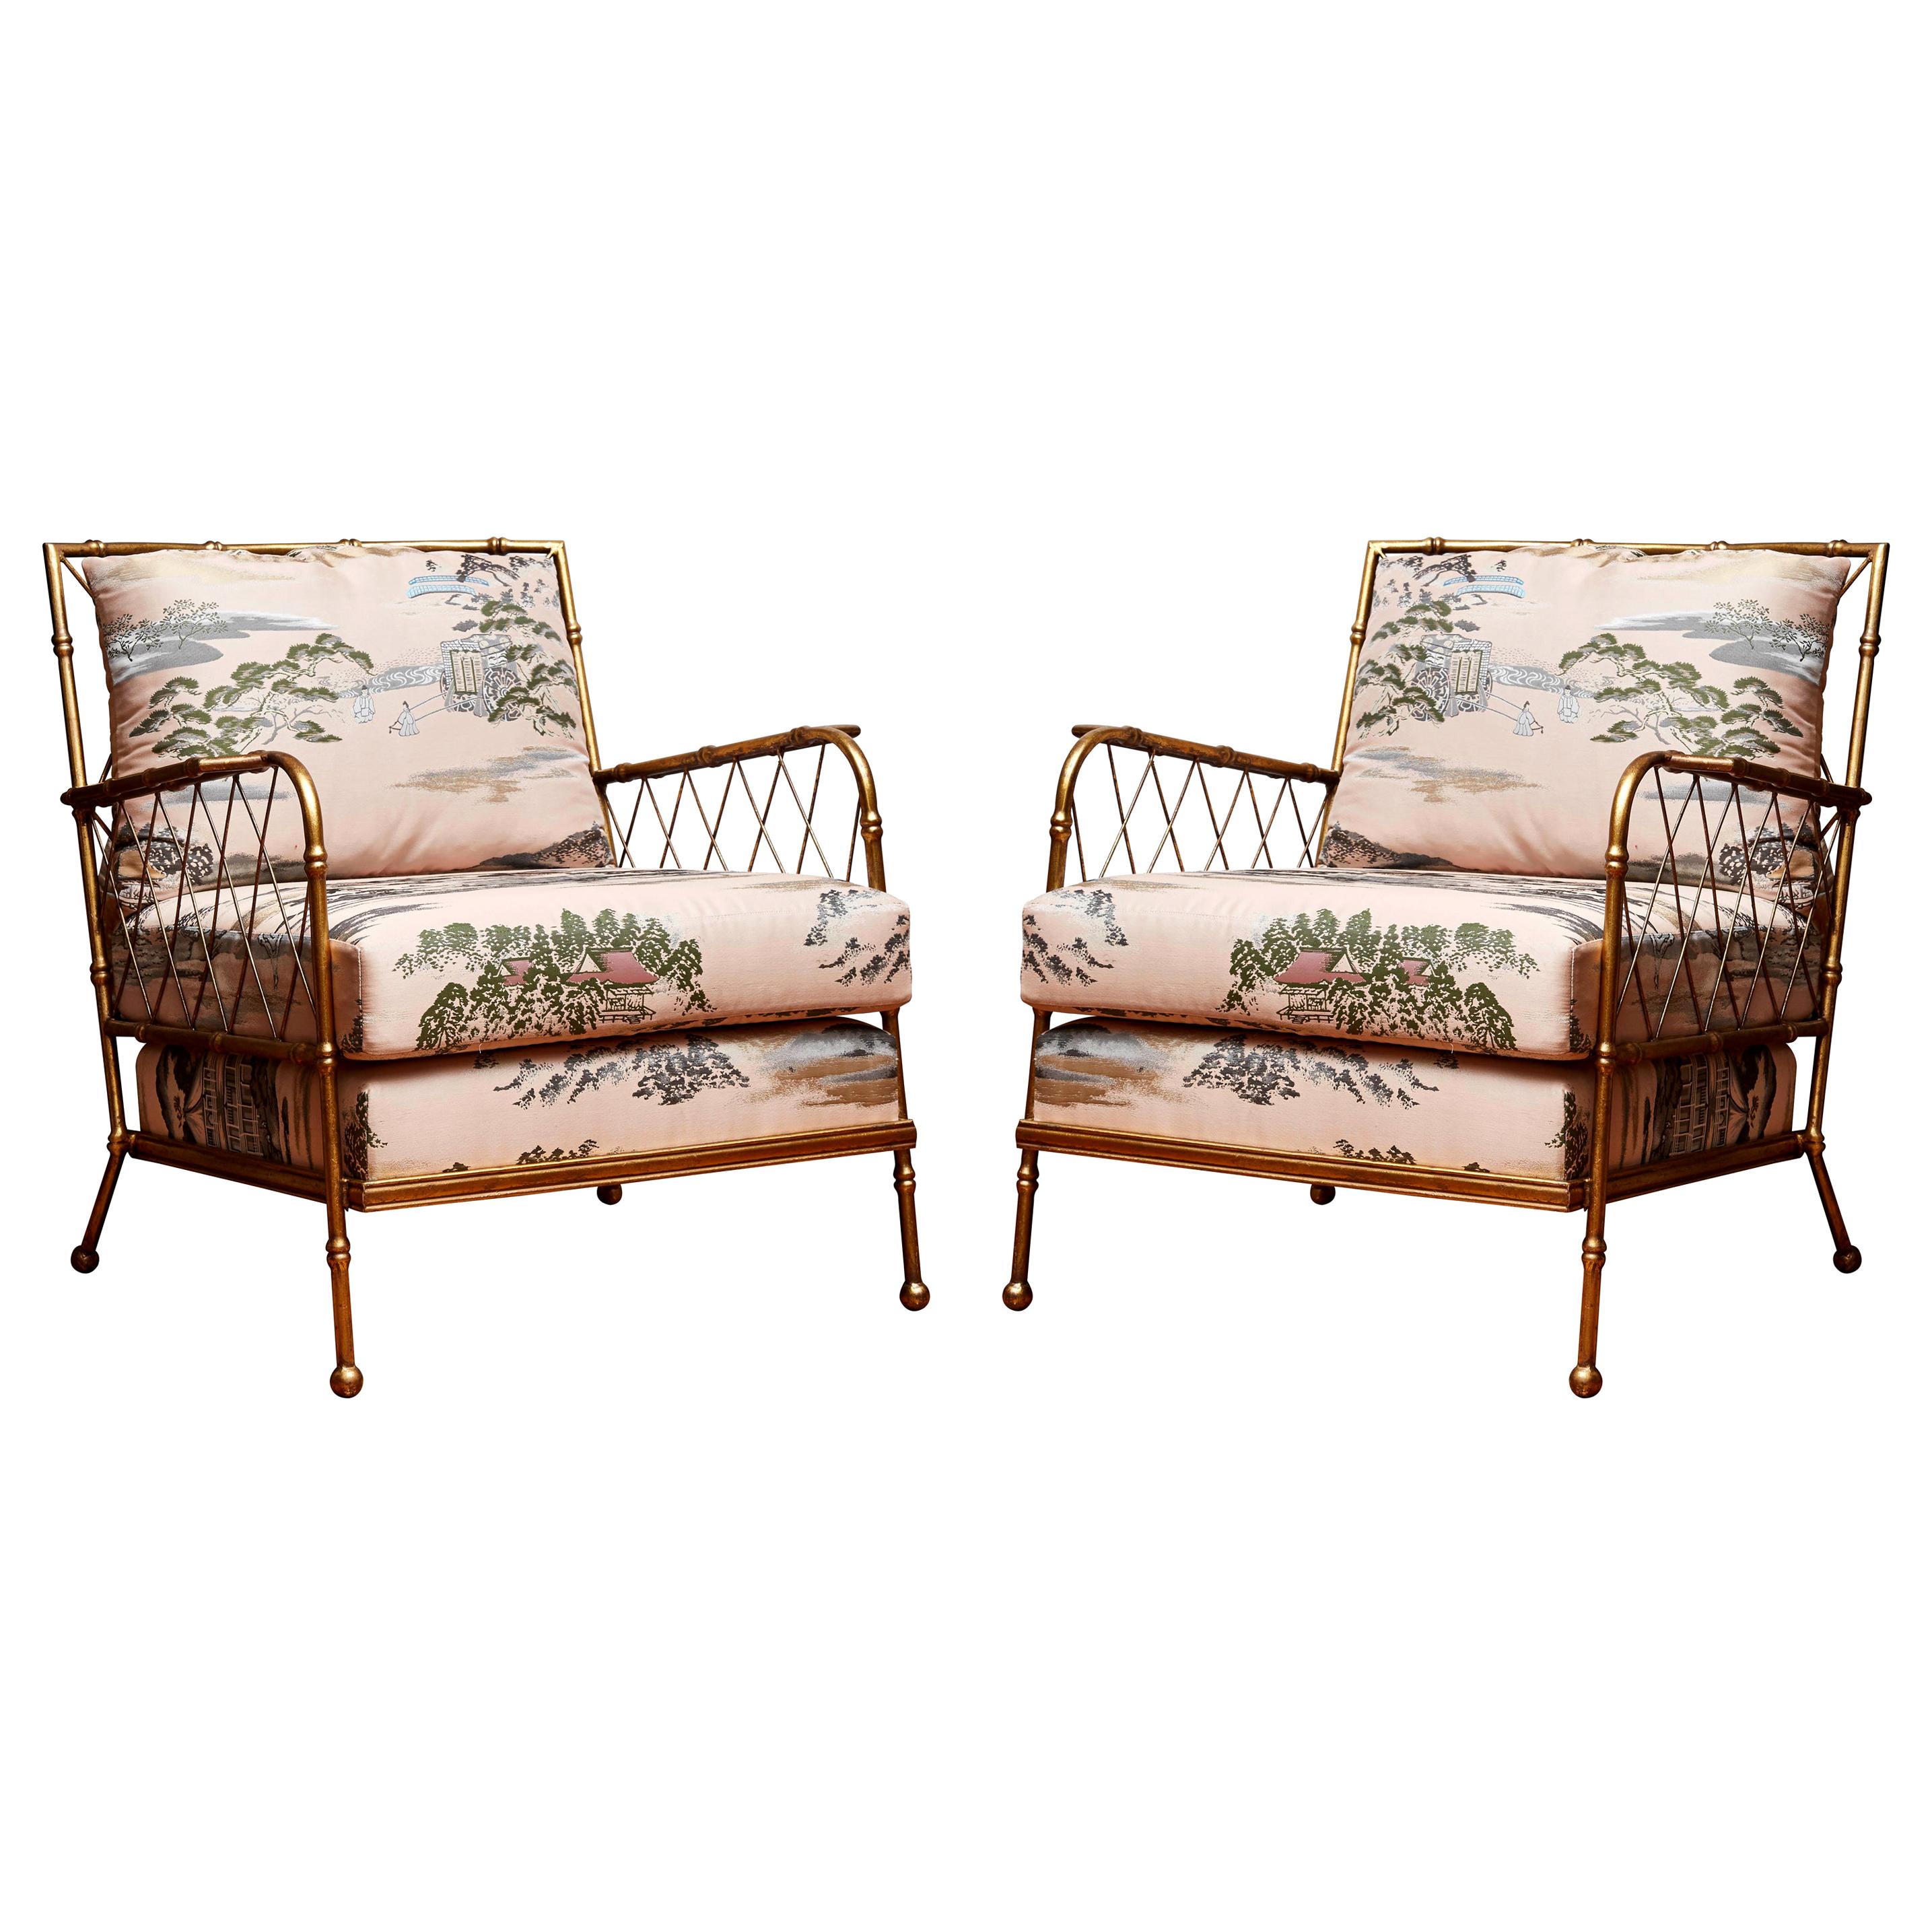 Pair of "Bamboo" Style Armchairs